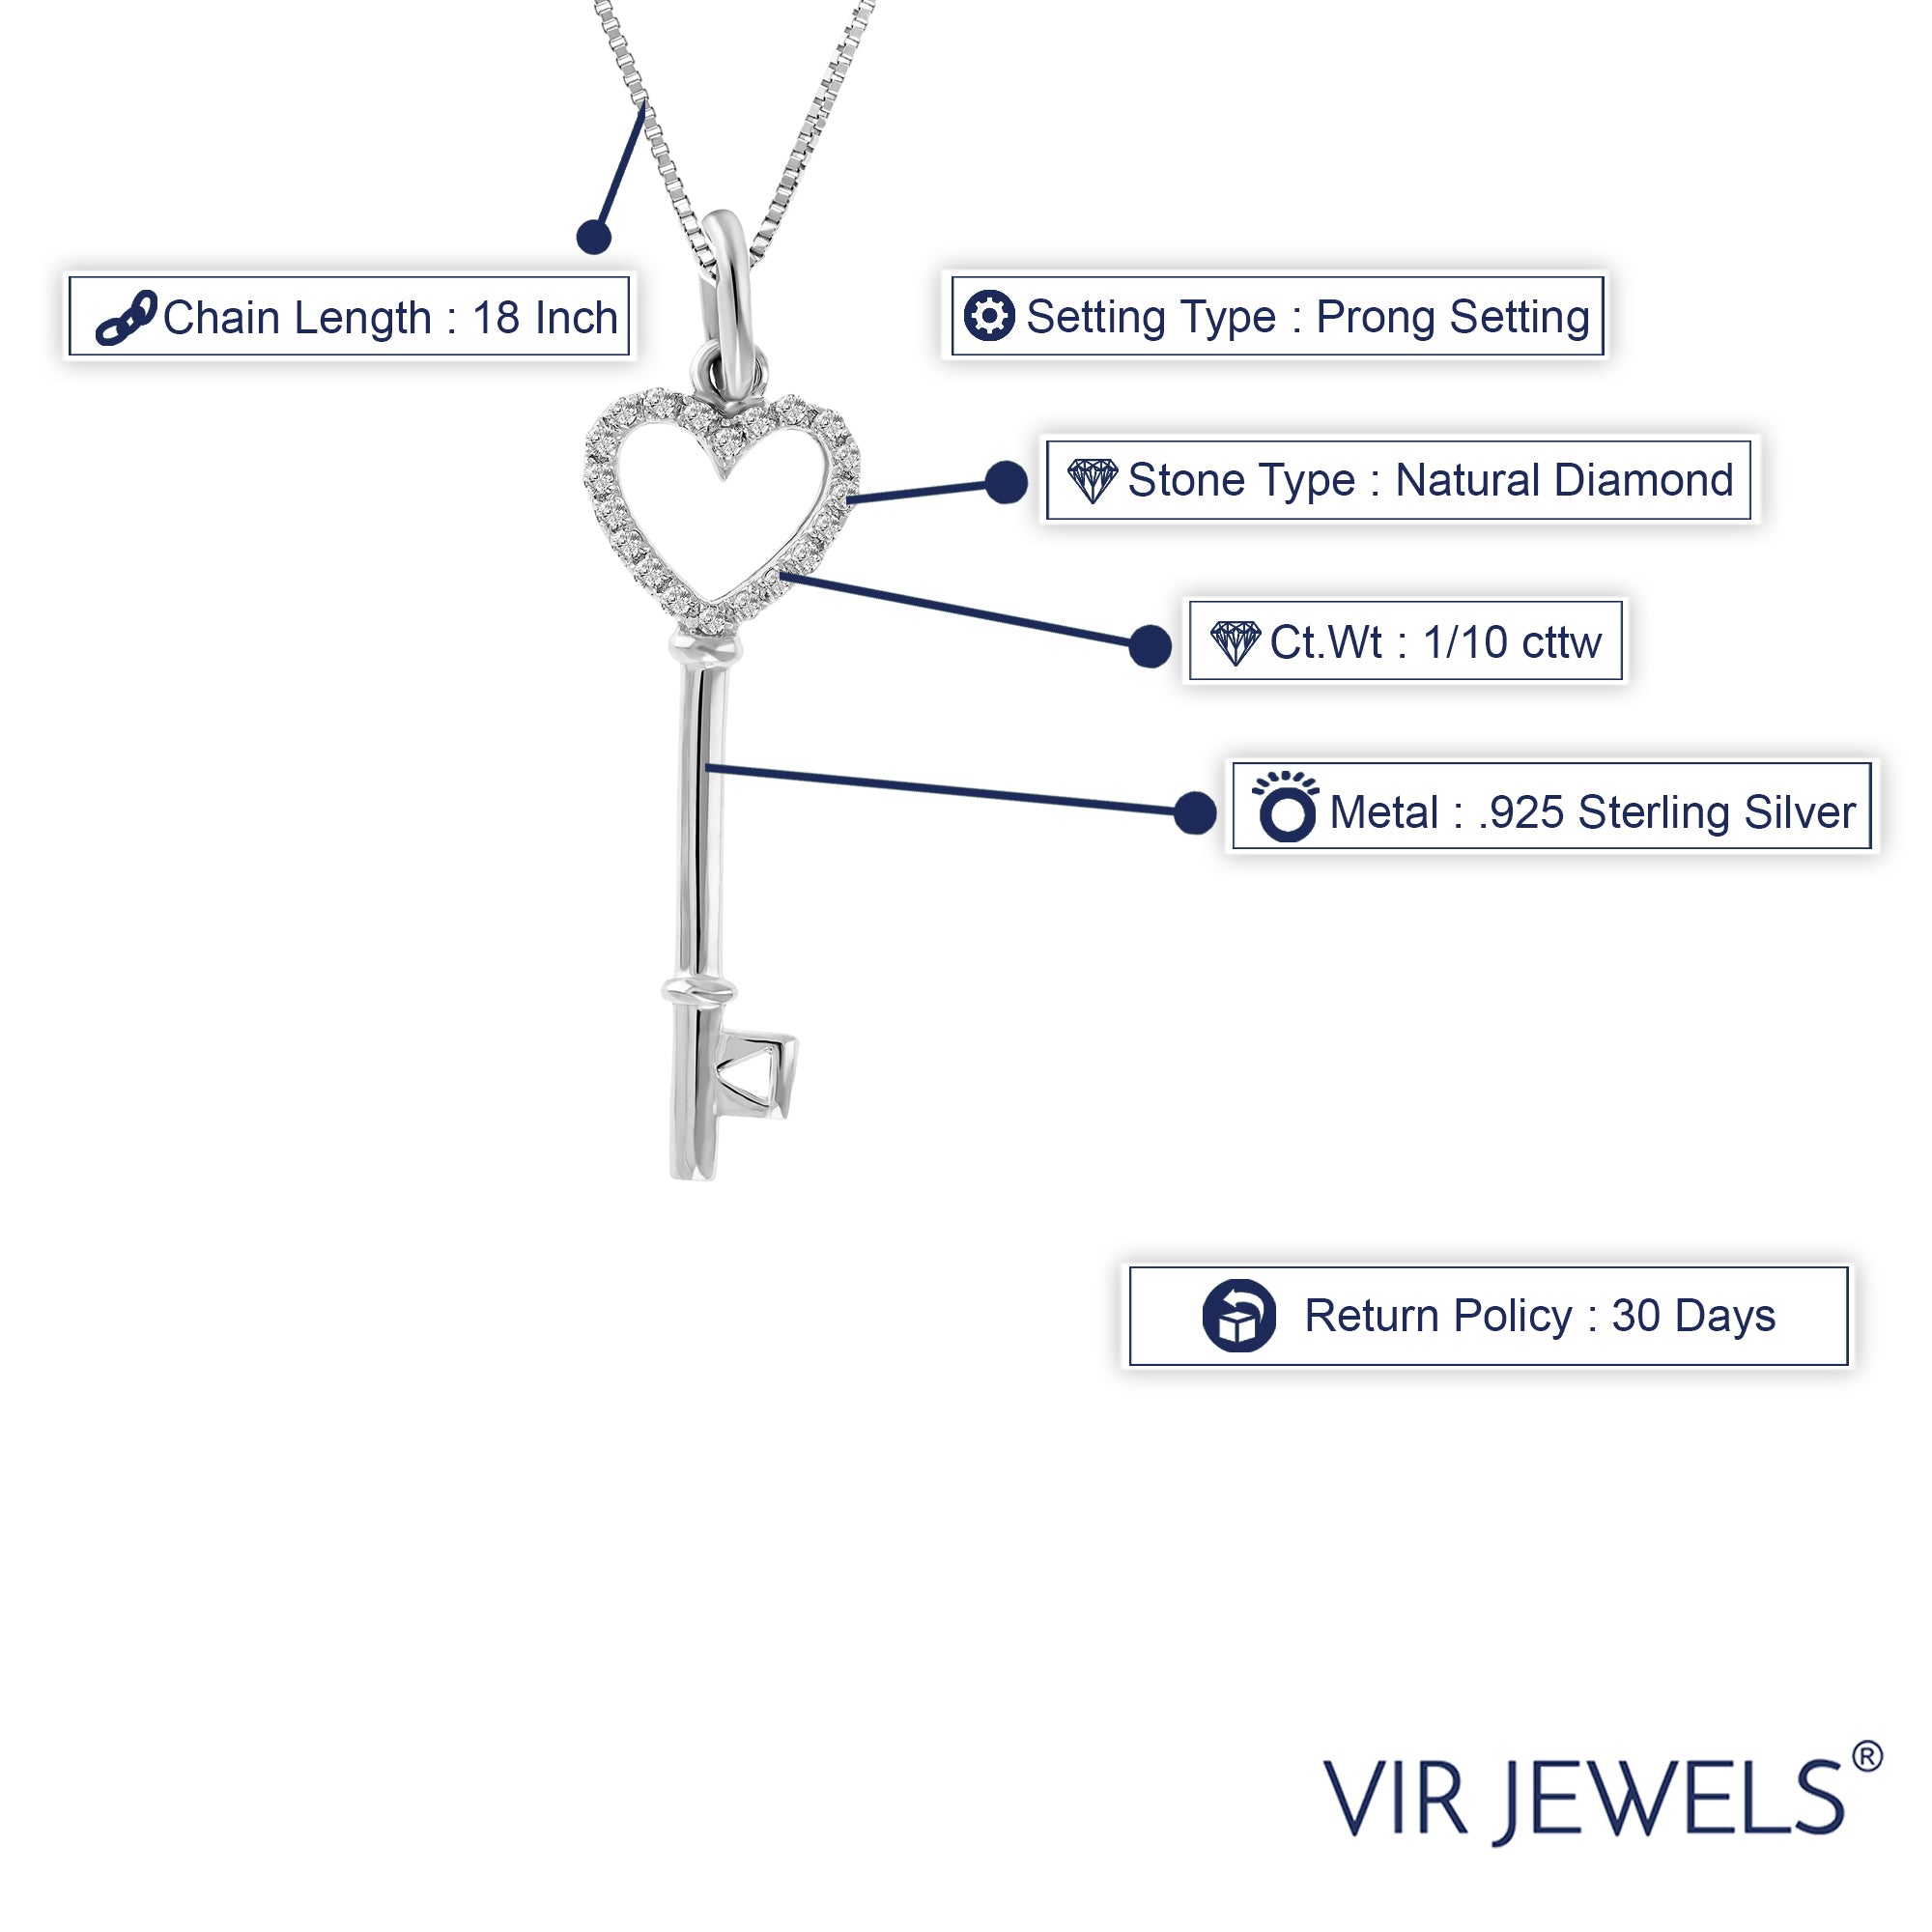 1/10 cttw Diamond Pendant, Diamond Key Pendant Necklace for Women in .925 Sterling Silver with Rhodium, 18 Inch Chain, Prong Setting